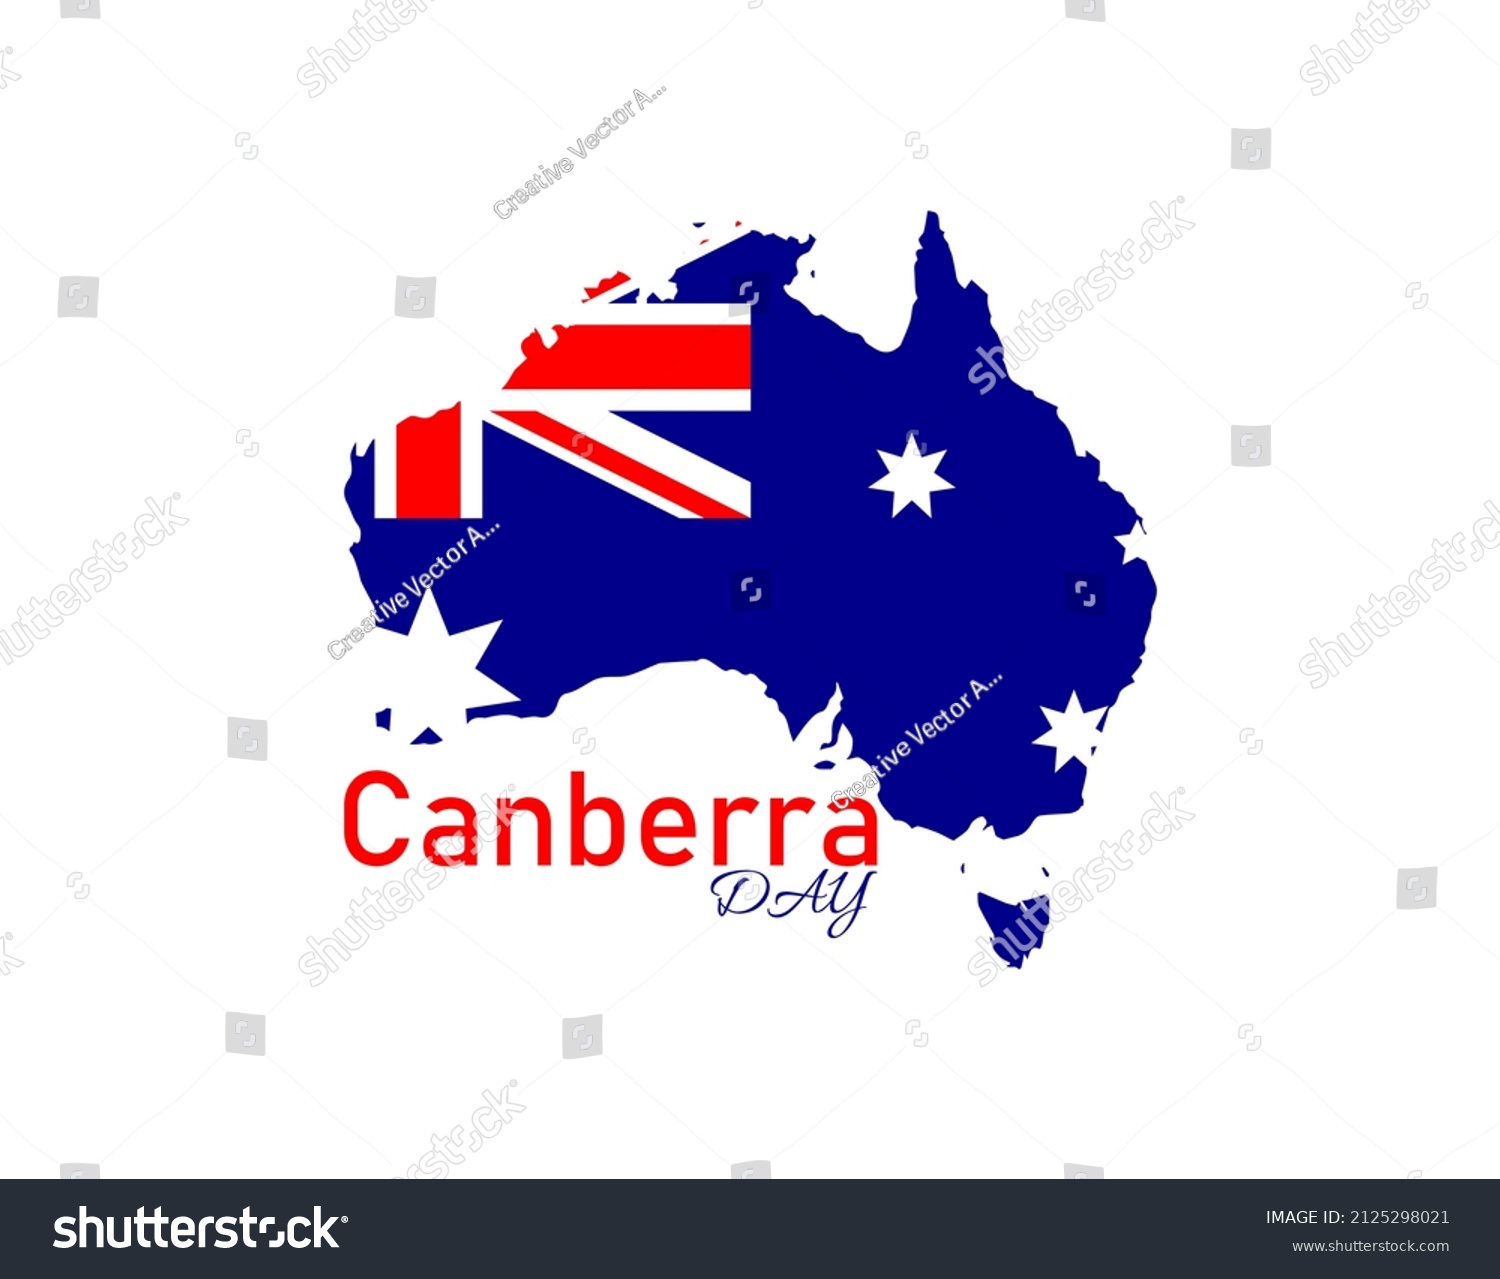 SVG of Canberra Day Australia. It is on Second Monday of March in honor of its official naming (Canberra) on March 12, 1913 in the Australian Capital Territory and the Jervis Bay Territory. svg